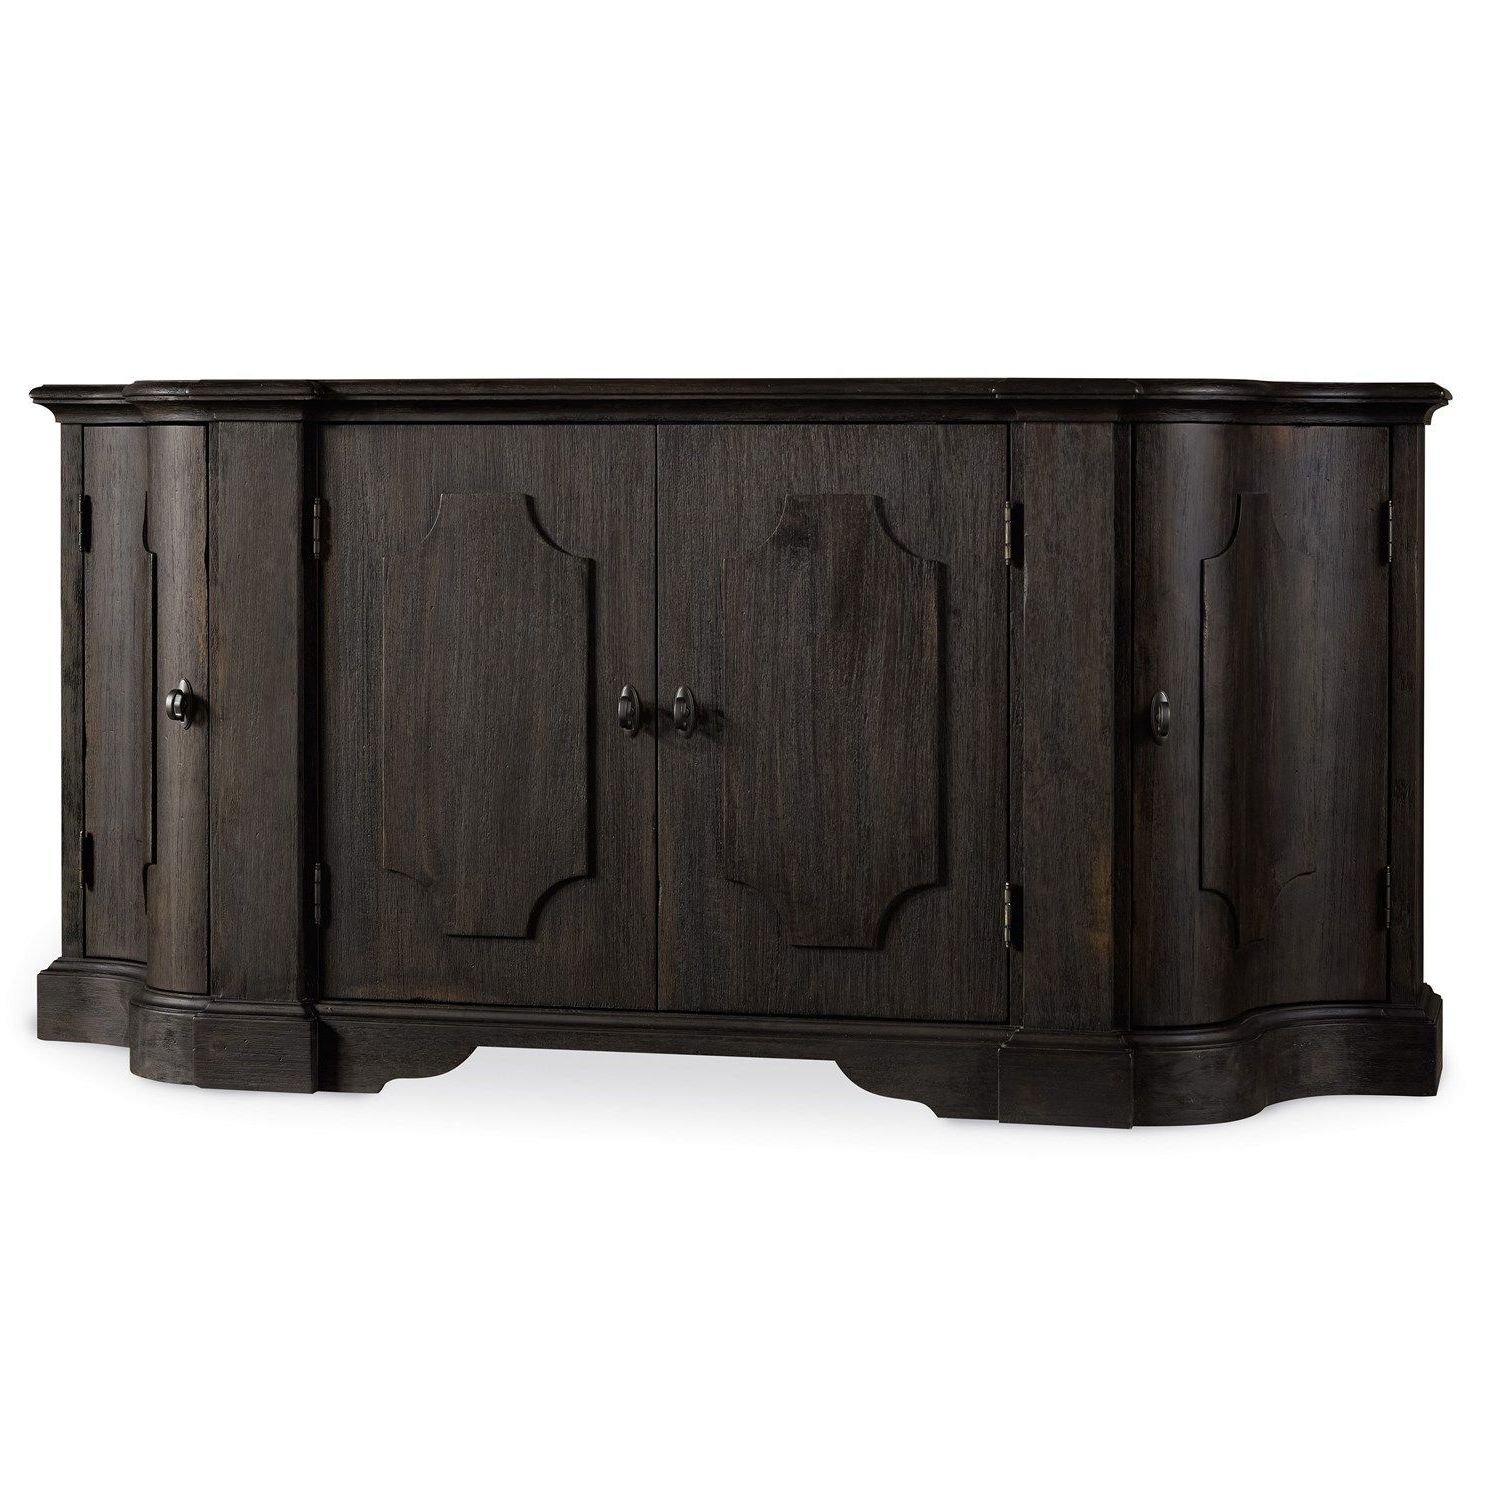 Hooker Furniture 5280 75900 Corsica Credenza In Dark Wood Intended For Hewlett Sideboards (View 13 of 20)